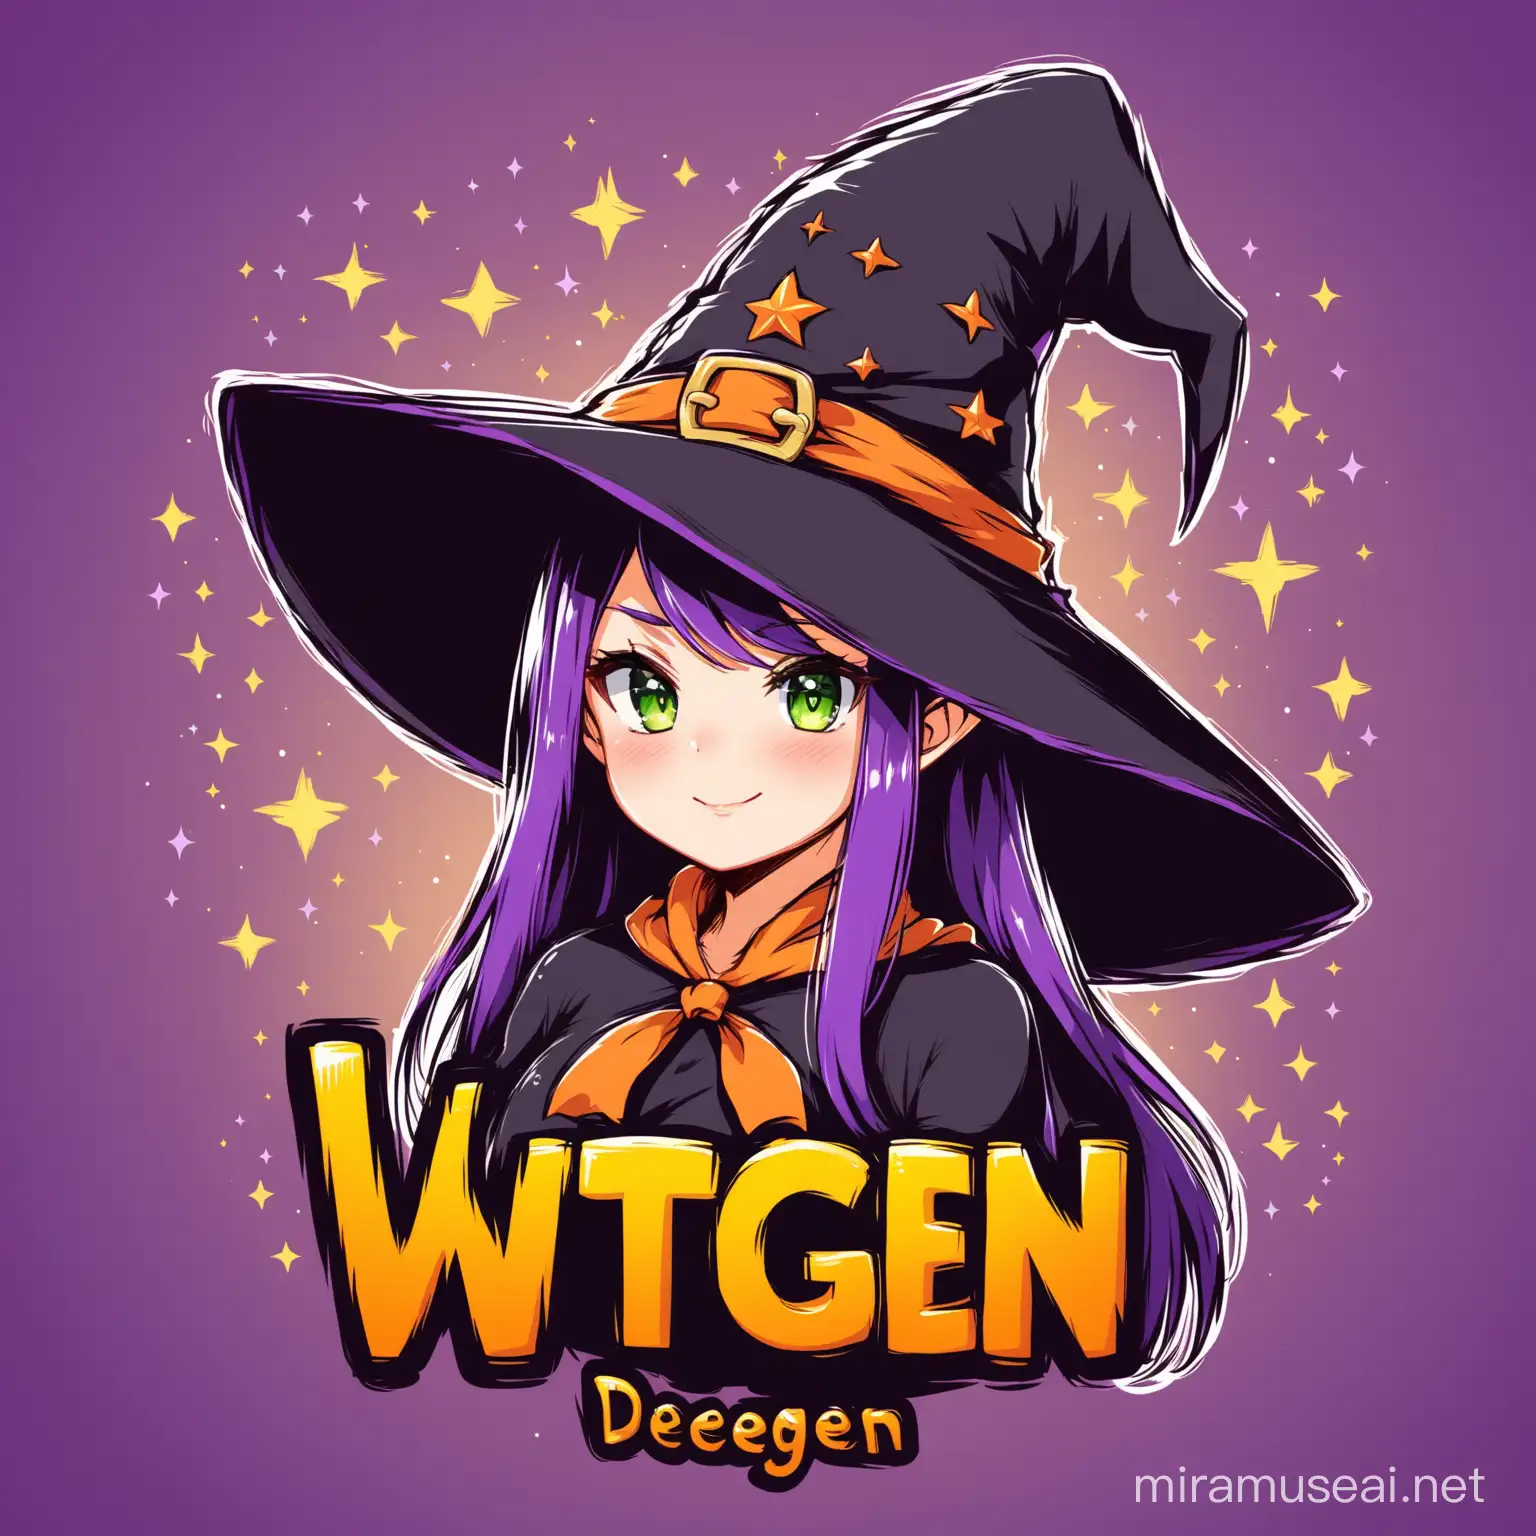 Mystical Witch Hat Degen with Engraved Name Fantasy Halloween Costume Accessory